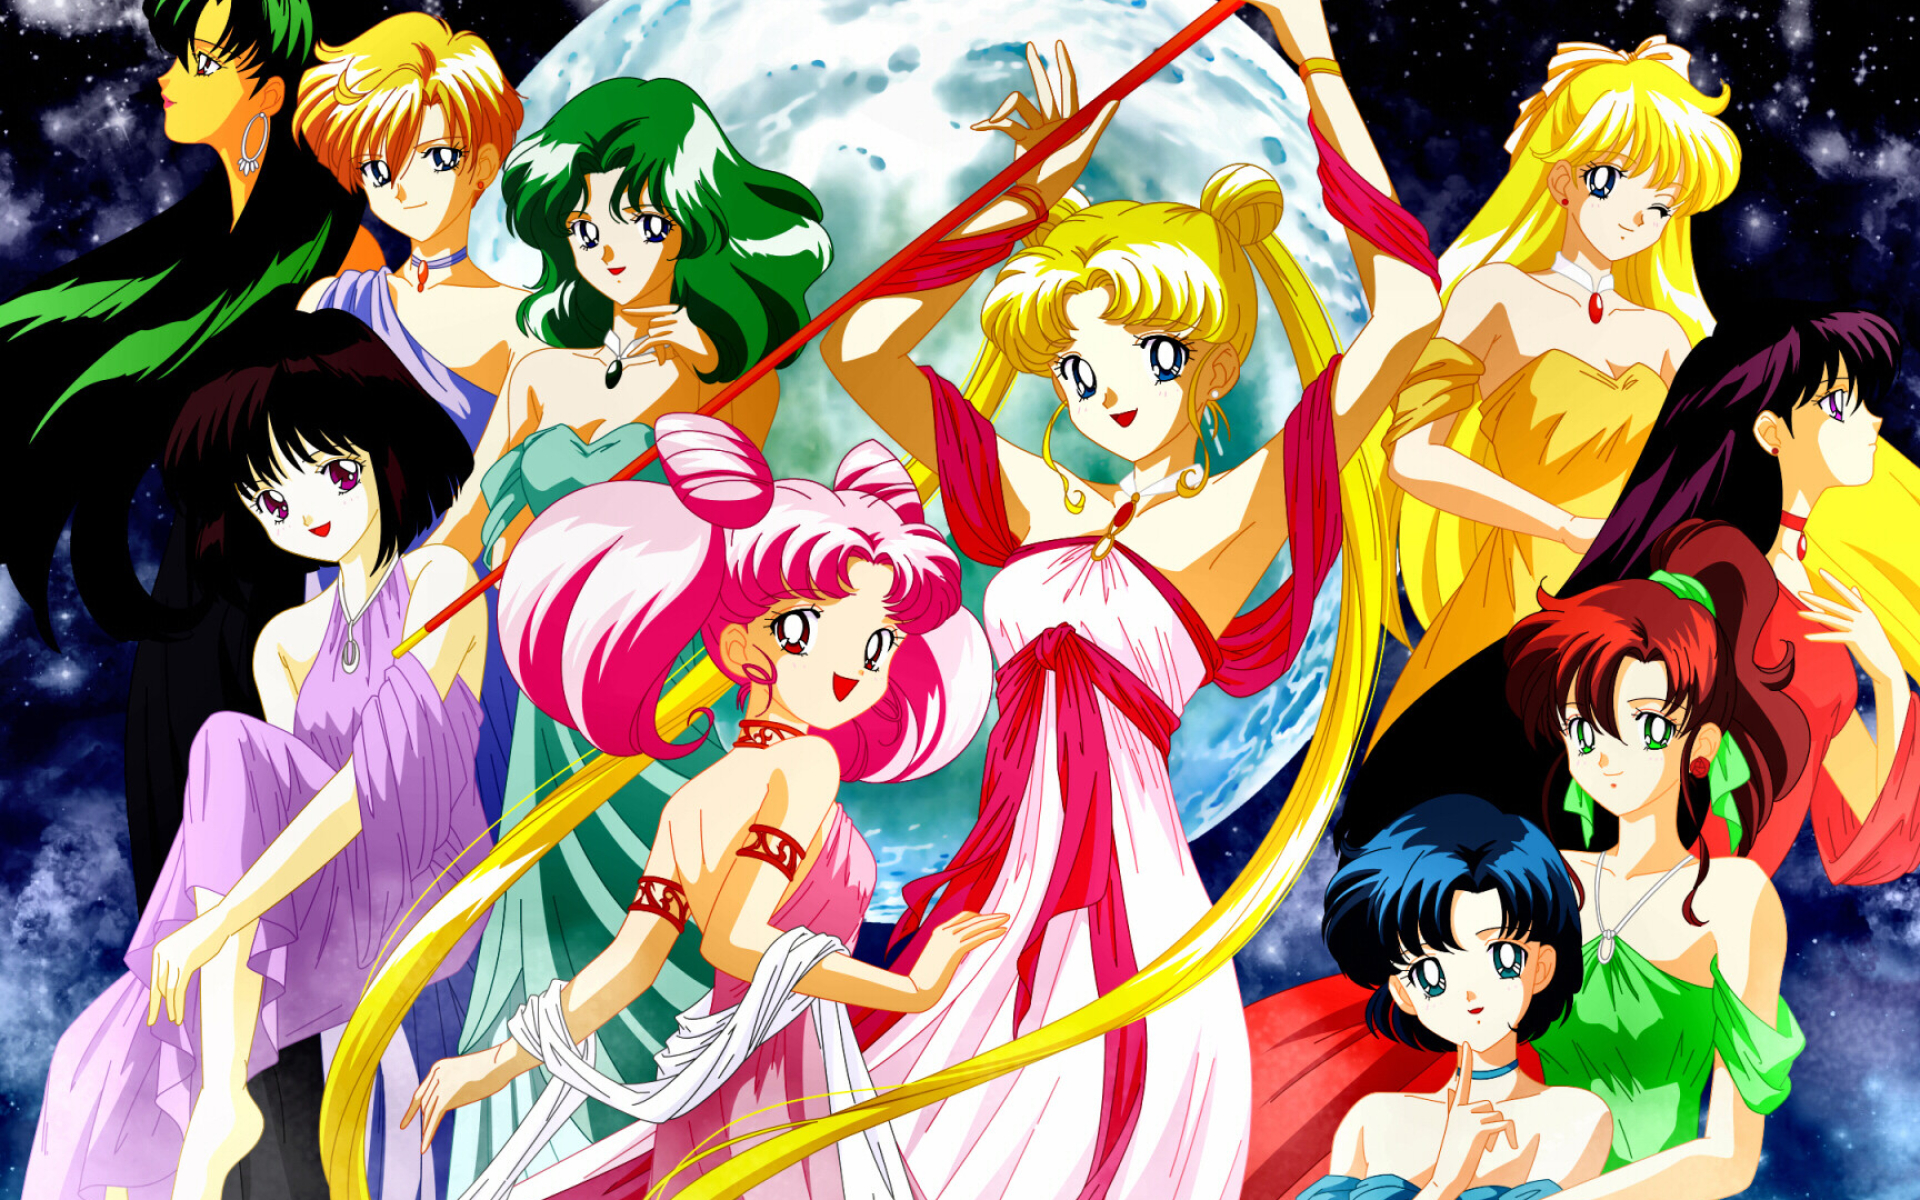 Sailor Moon Eternal: A two part movie of the SM Crystal franchise which adapts the Dream arc from the manga. 1920x1200 HD Wallpaper.